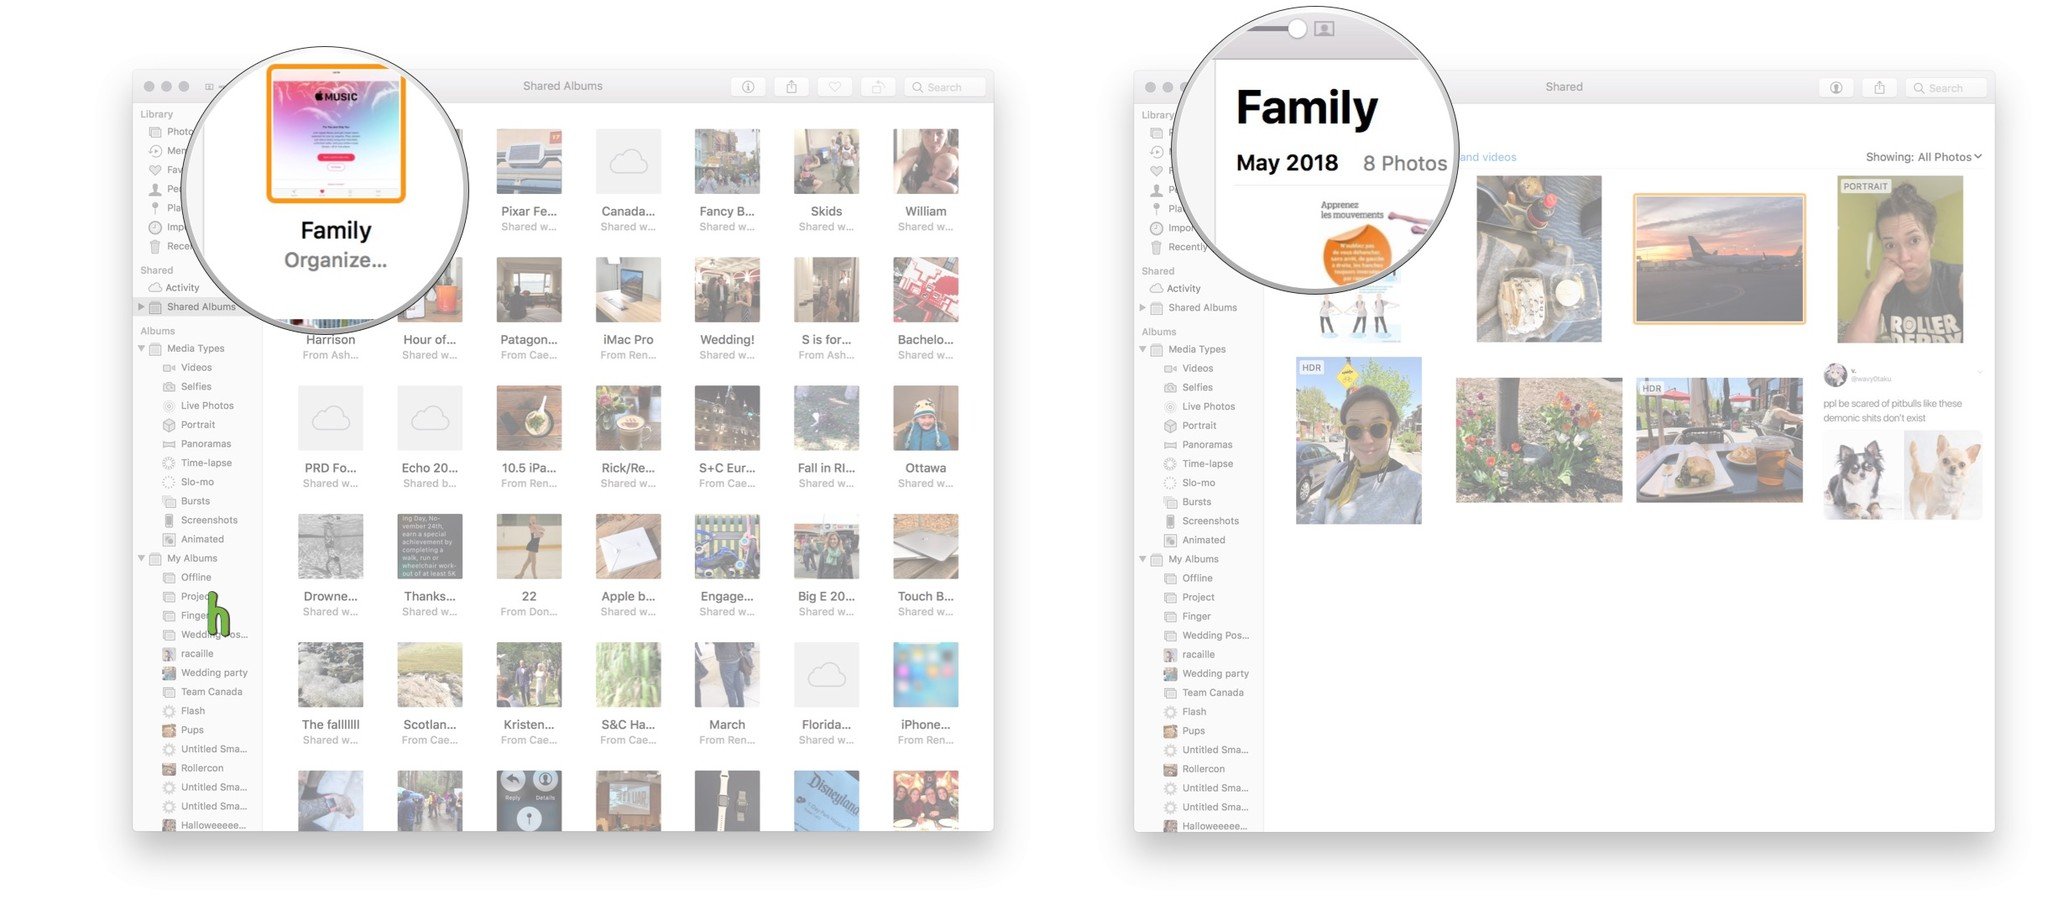 View Family album on Mac: Launch photos, Click shared albums, Select Family album